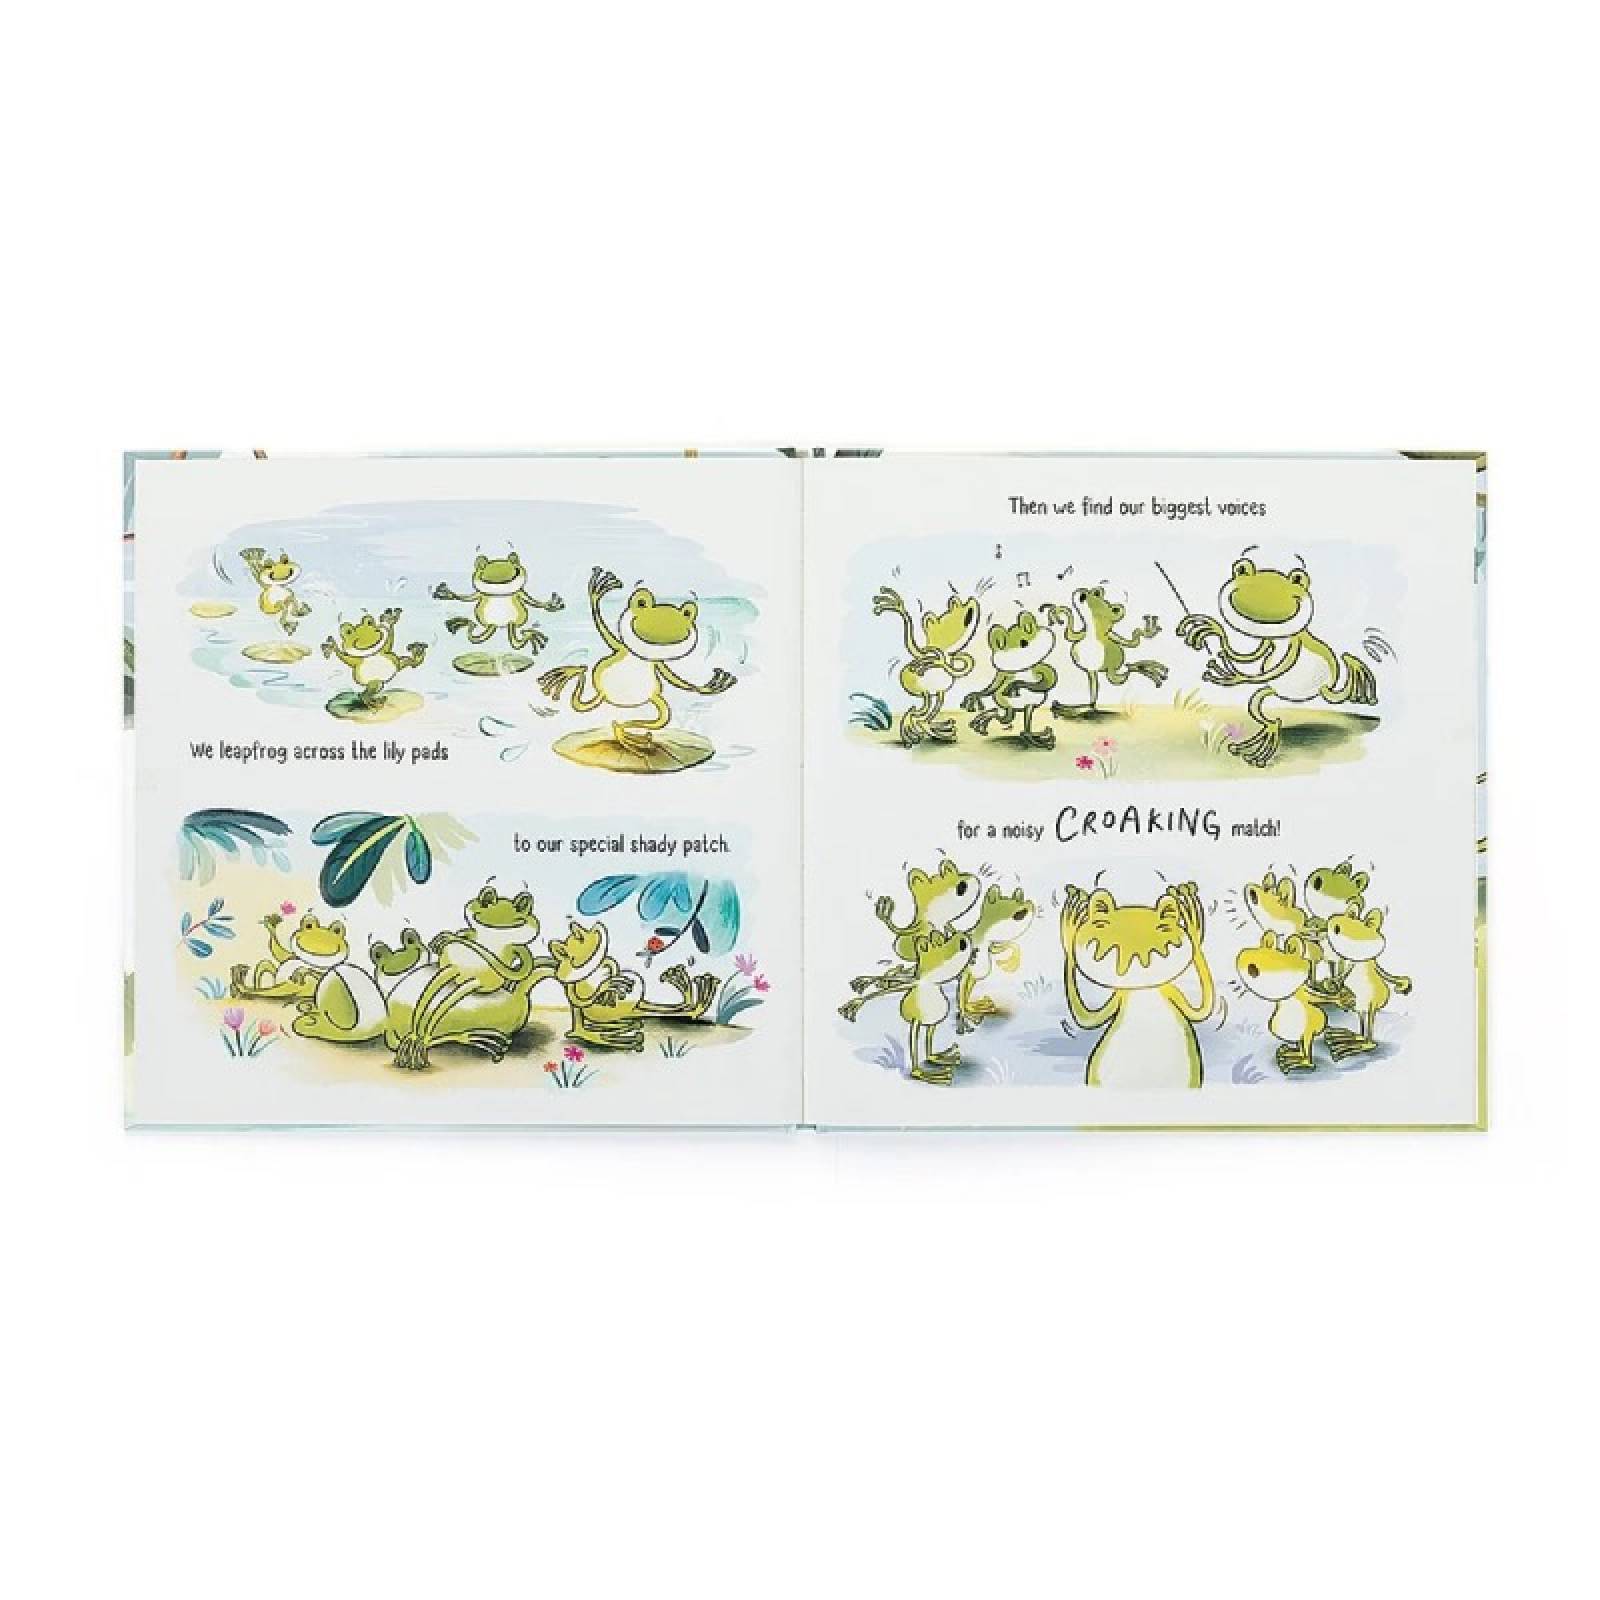 A Fantastic Day For Finnegan Frog Book By Jellycat thumbnails